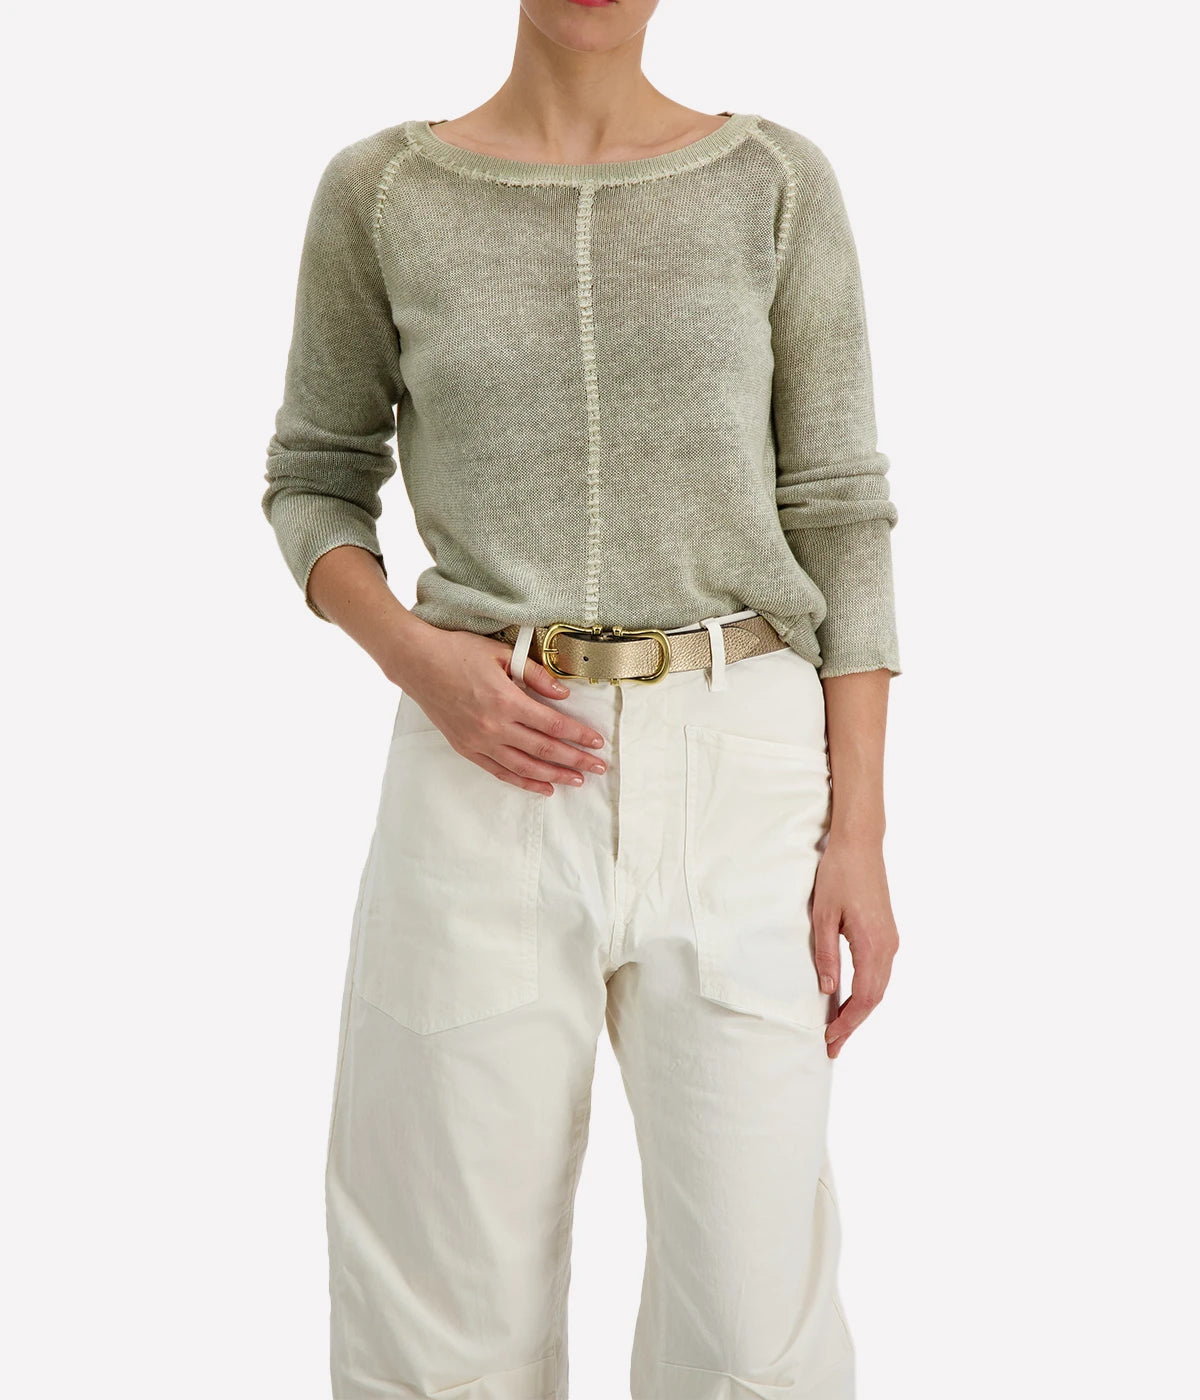 Dusty green linen boatneck knit sweater with decorative accentuated stitching by Avant Toi